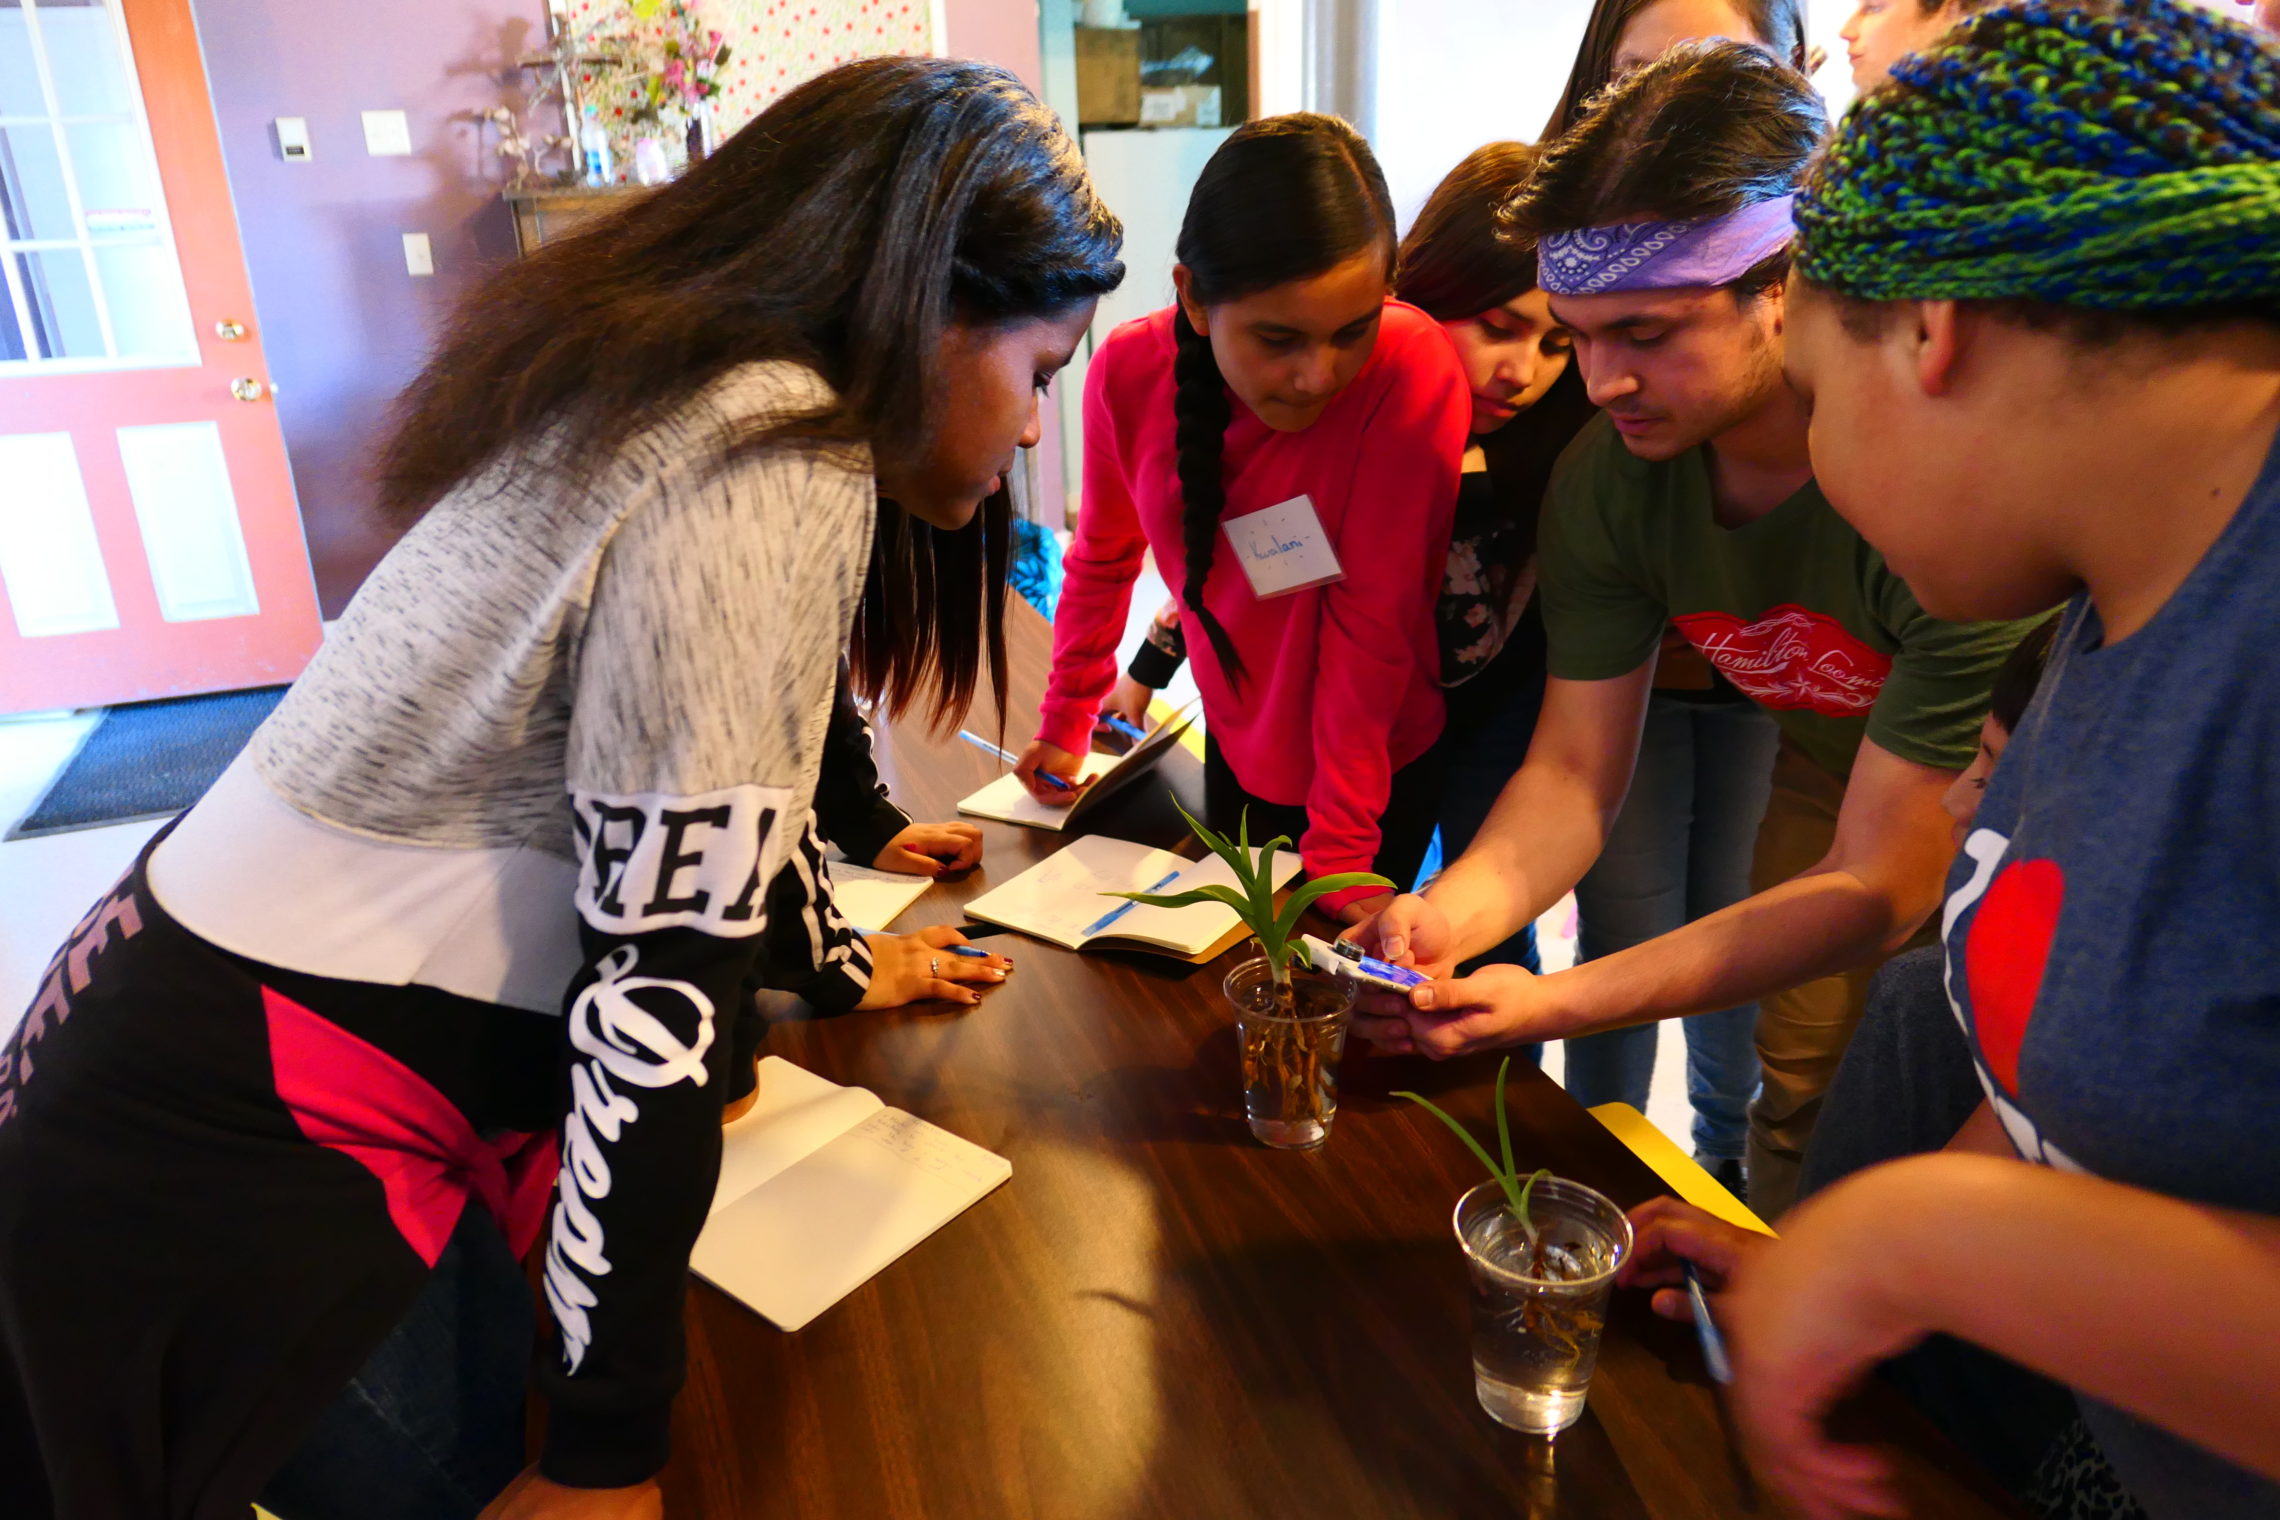 UW student Joshawah Eagle-Bear (center right) leads 6th grade students on a workshop titled "Water Is Life" at Campbell Farm in Wapato, Wash. CREDIT: ZIHAN CAO